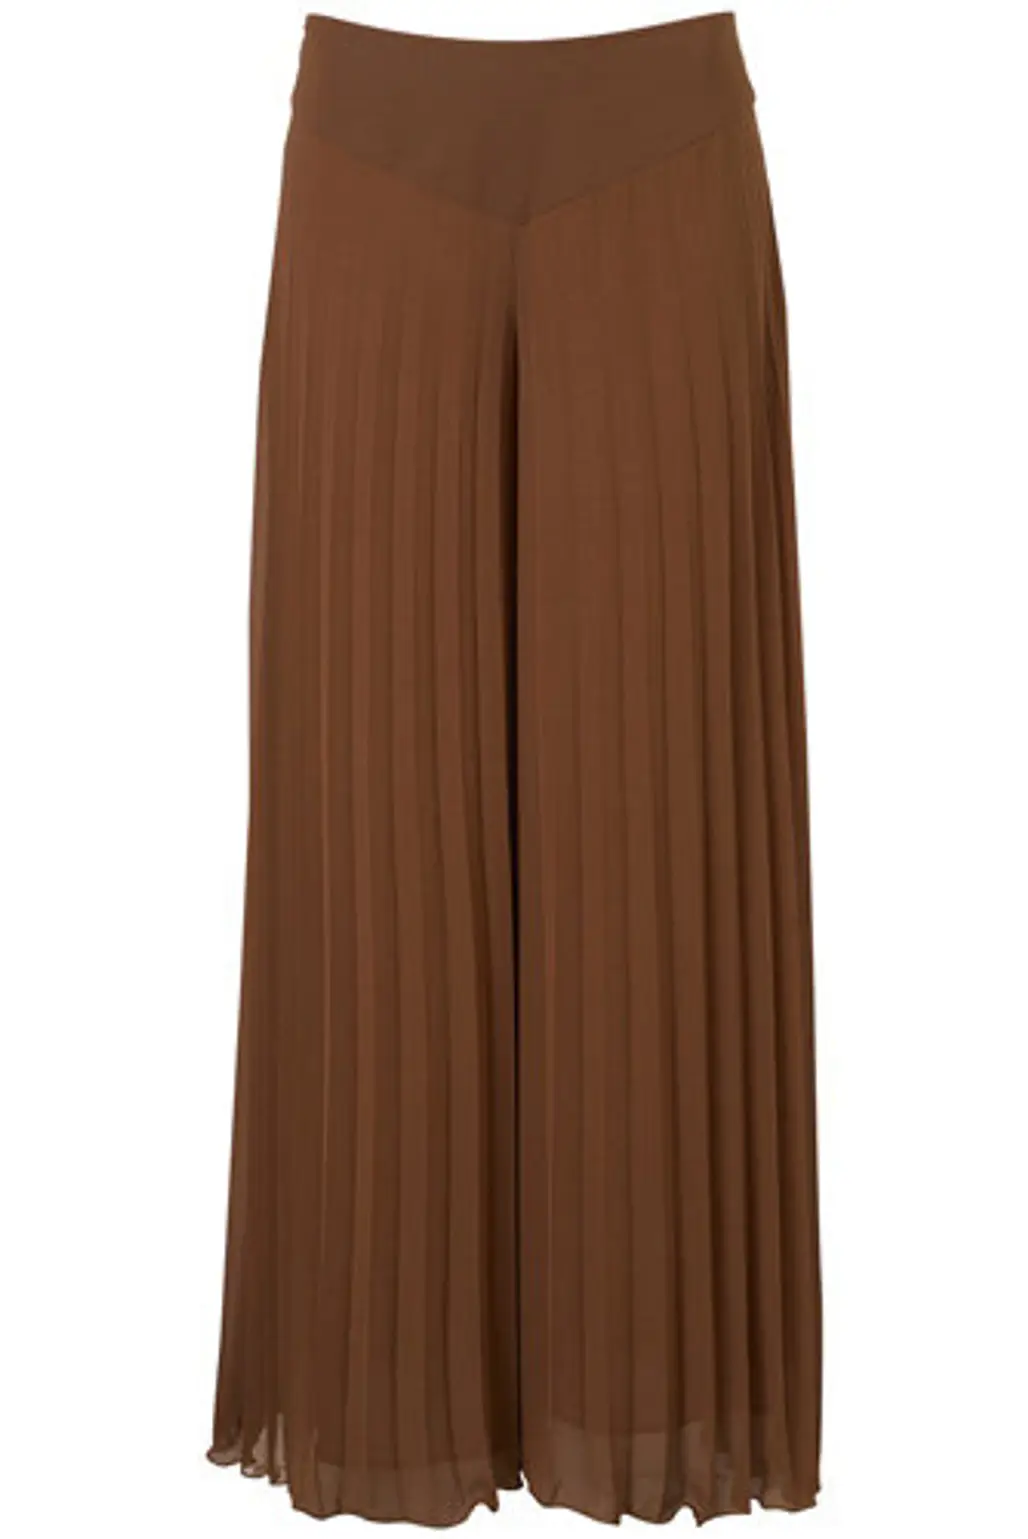 Topshop Brown Pleated Extreme Wide Leg Trousers